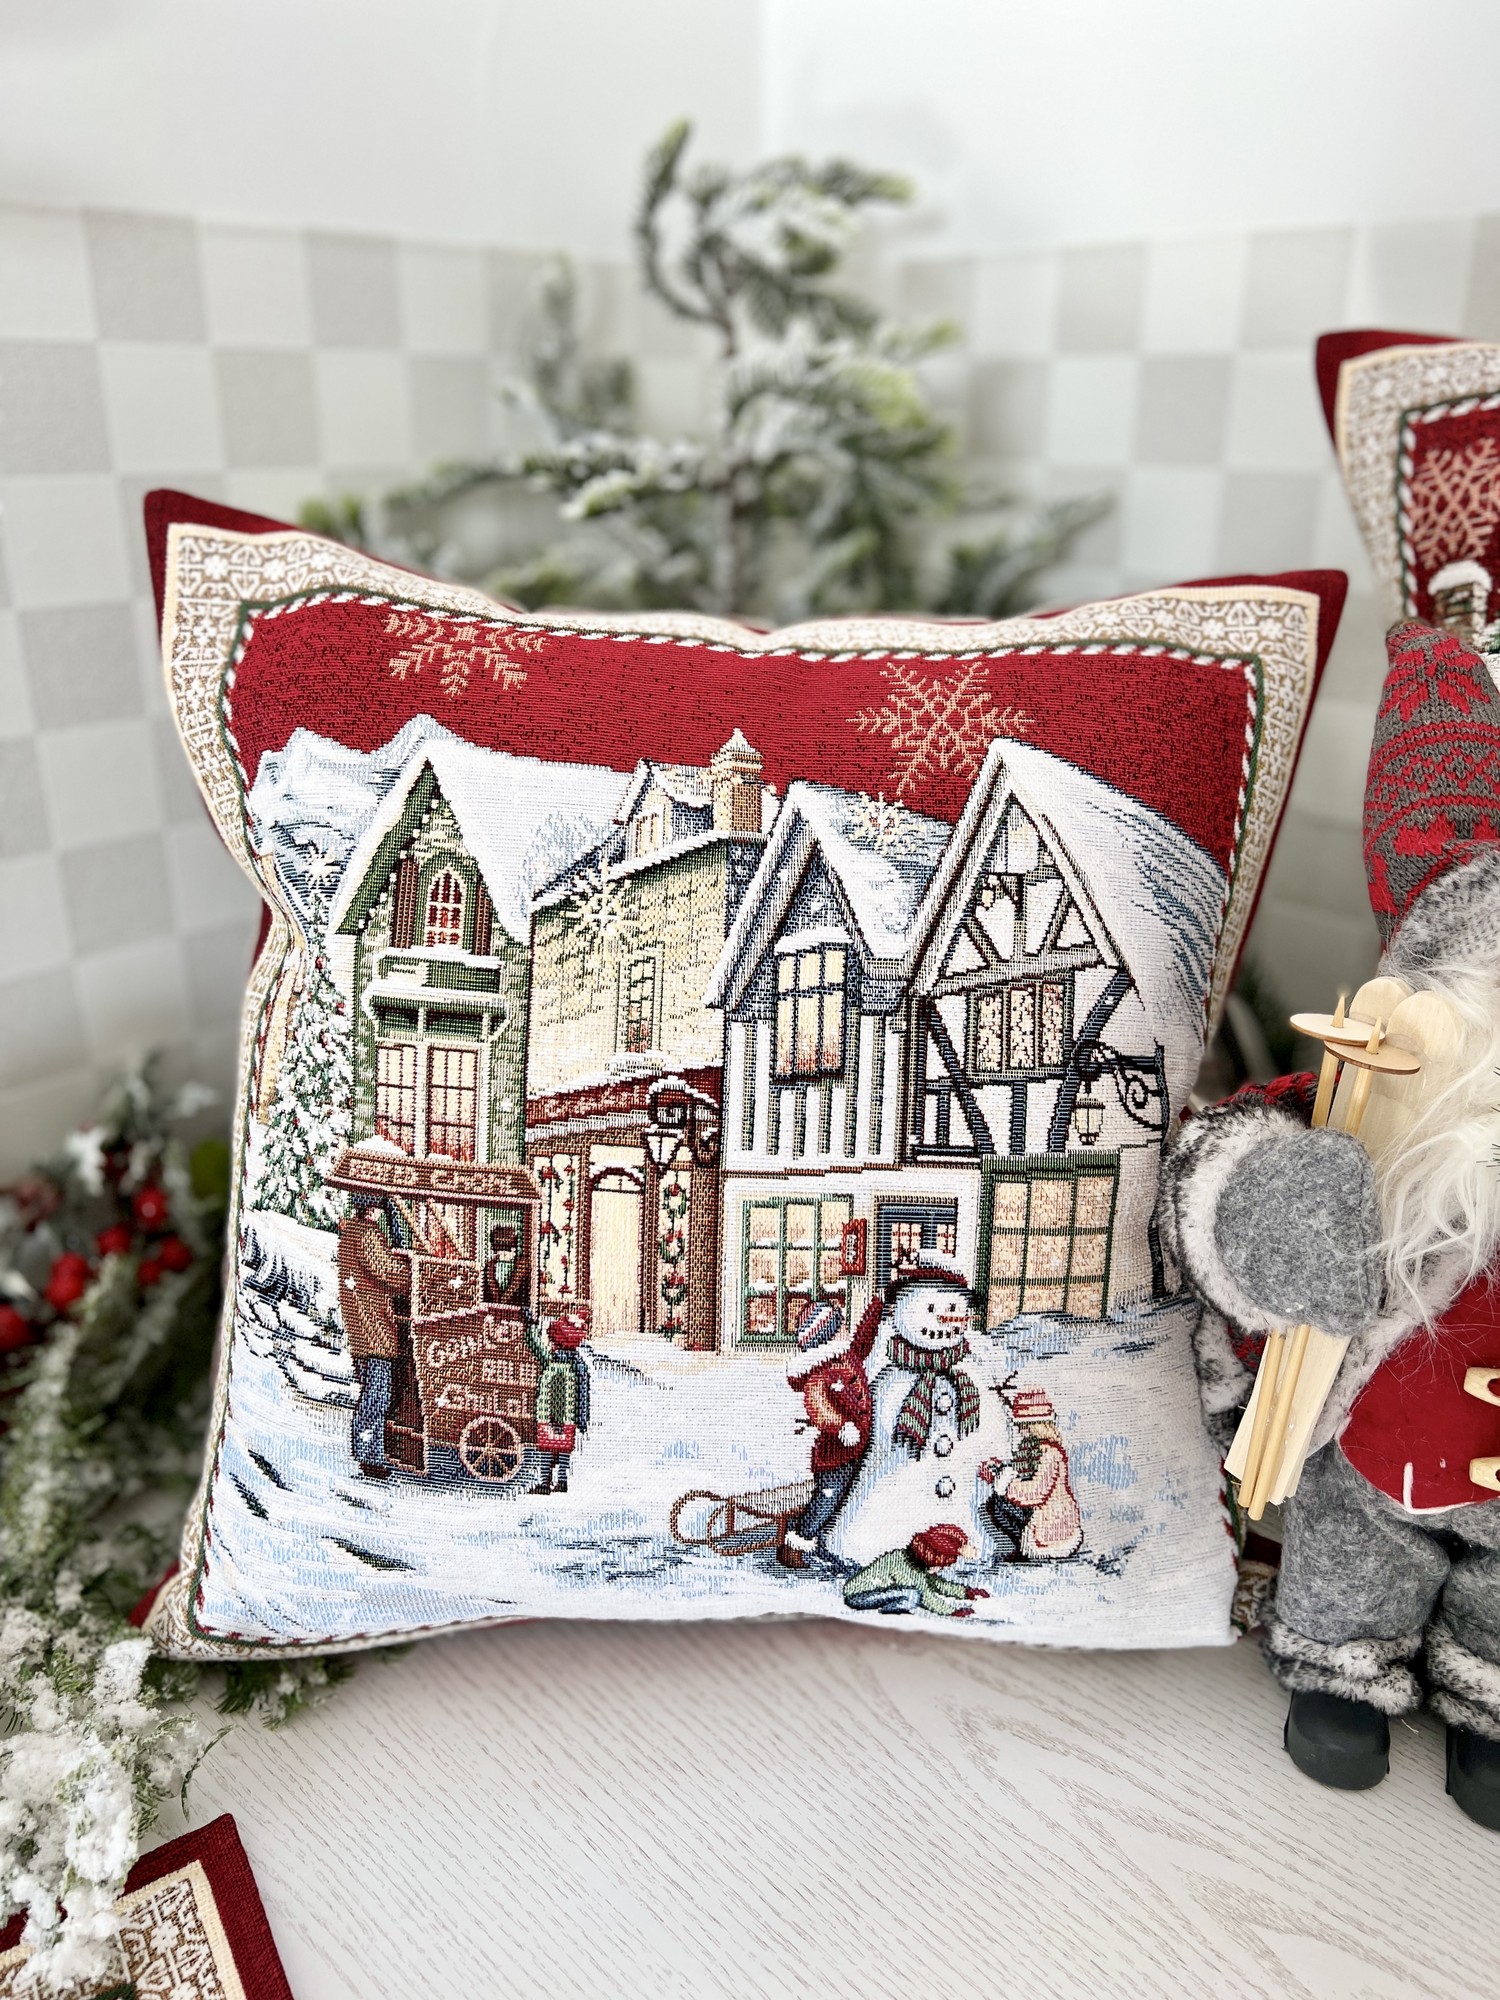 Christmas decorative tapestry pillowcase 18x18 in (45*45 cm.) one-sided